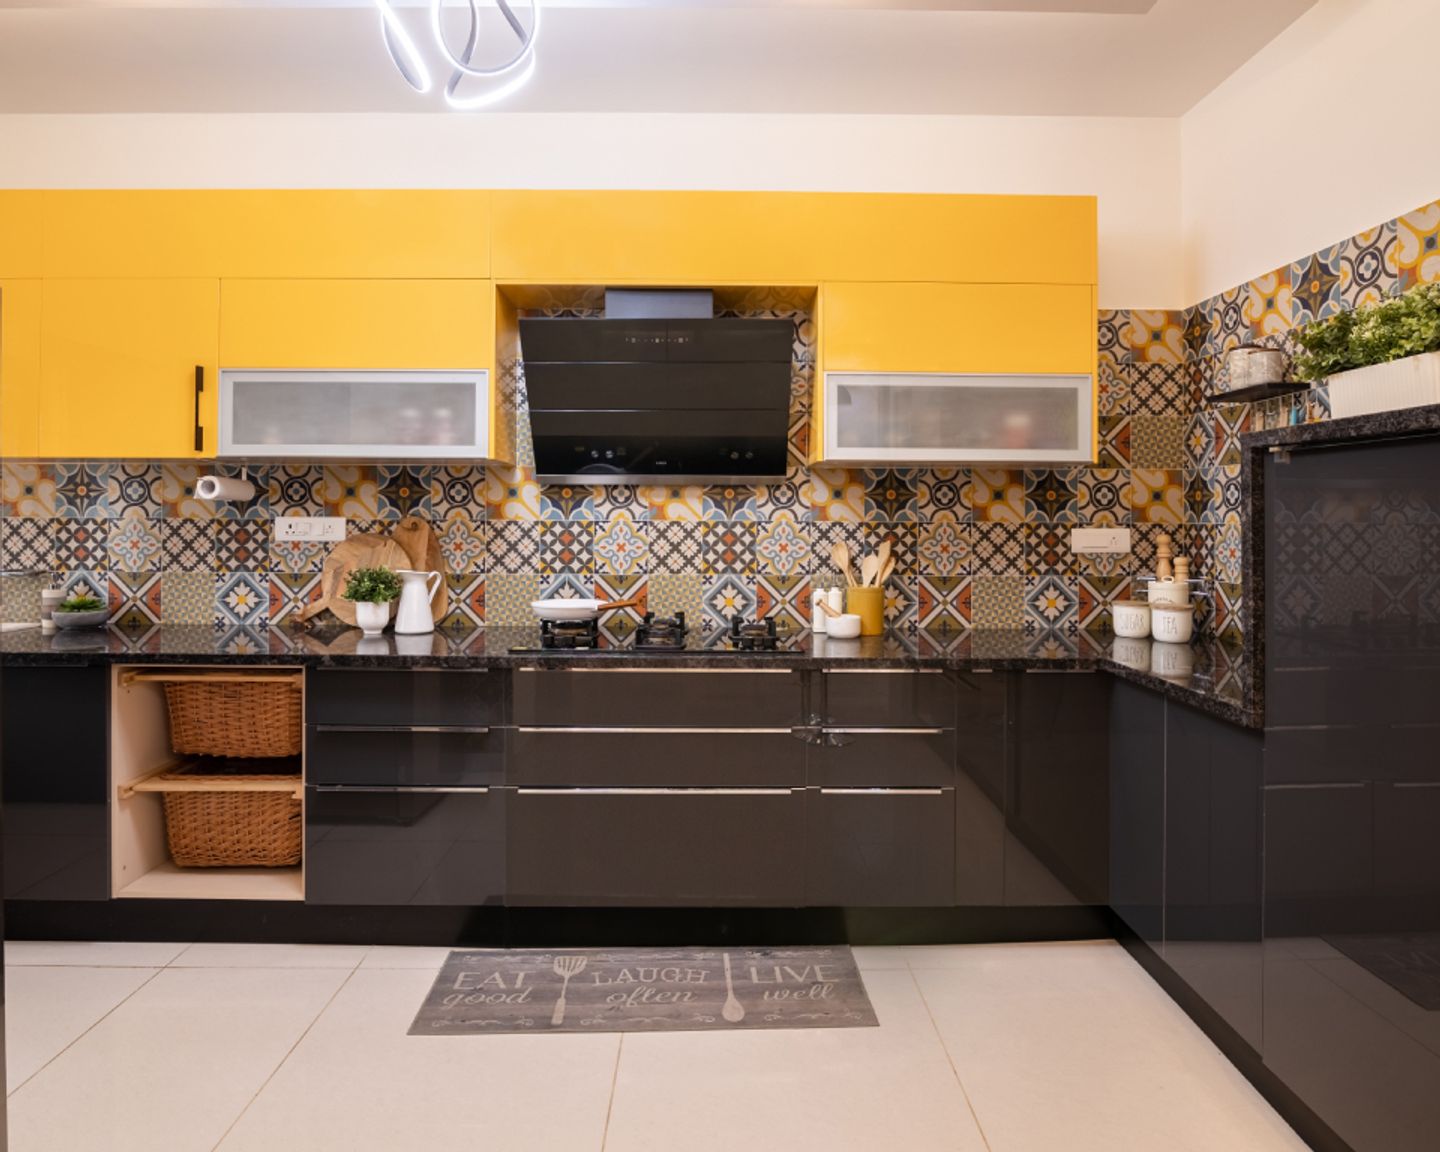 Kitchen Tiles With A Wall Dado - Livspace